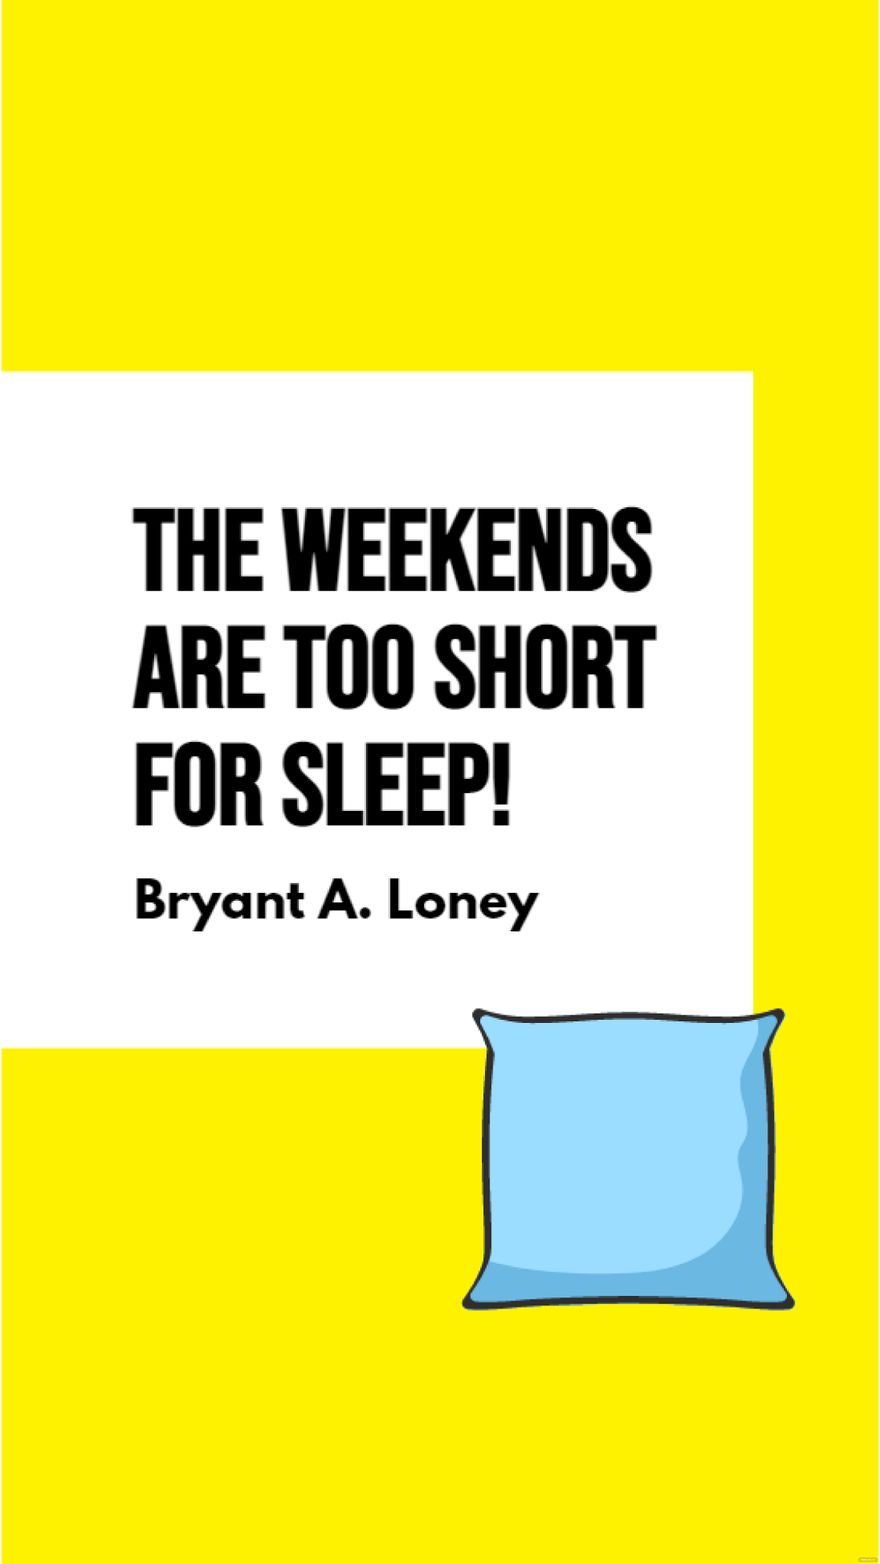 Free Bryant A. Loney - The weekends are too short for sleep!  in JPG